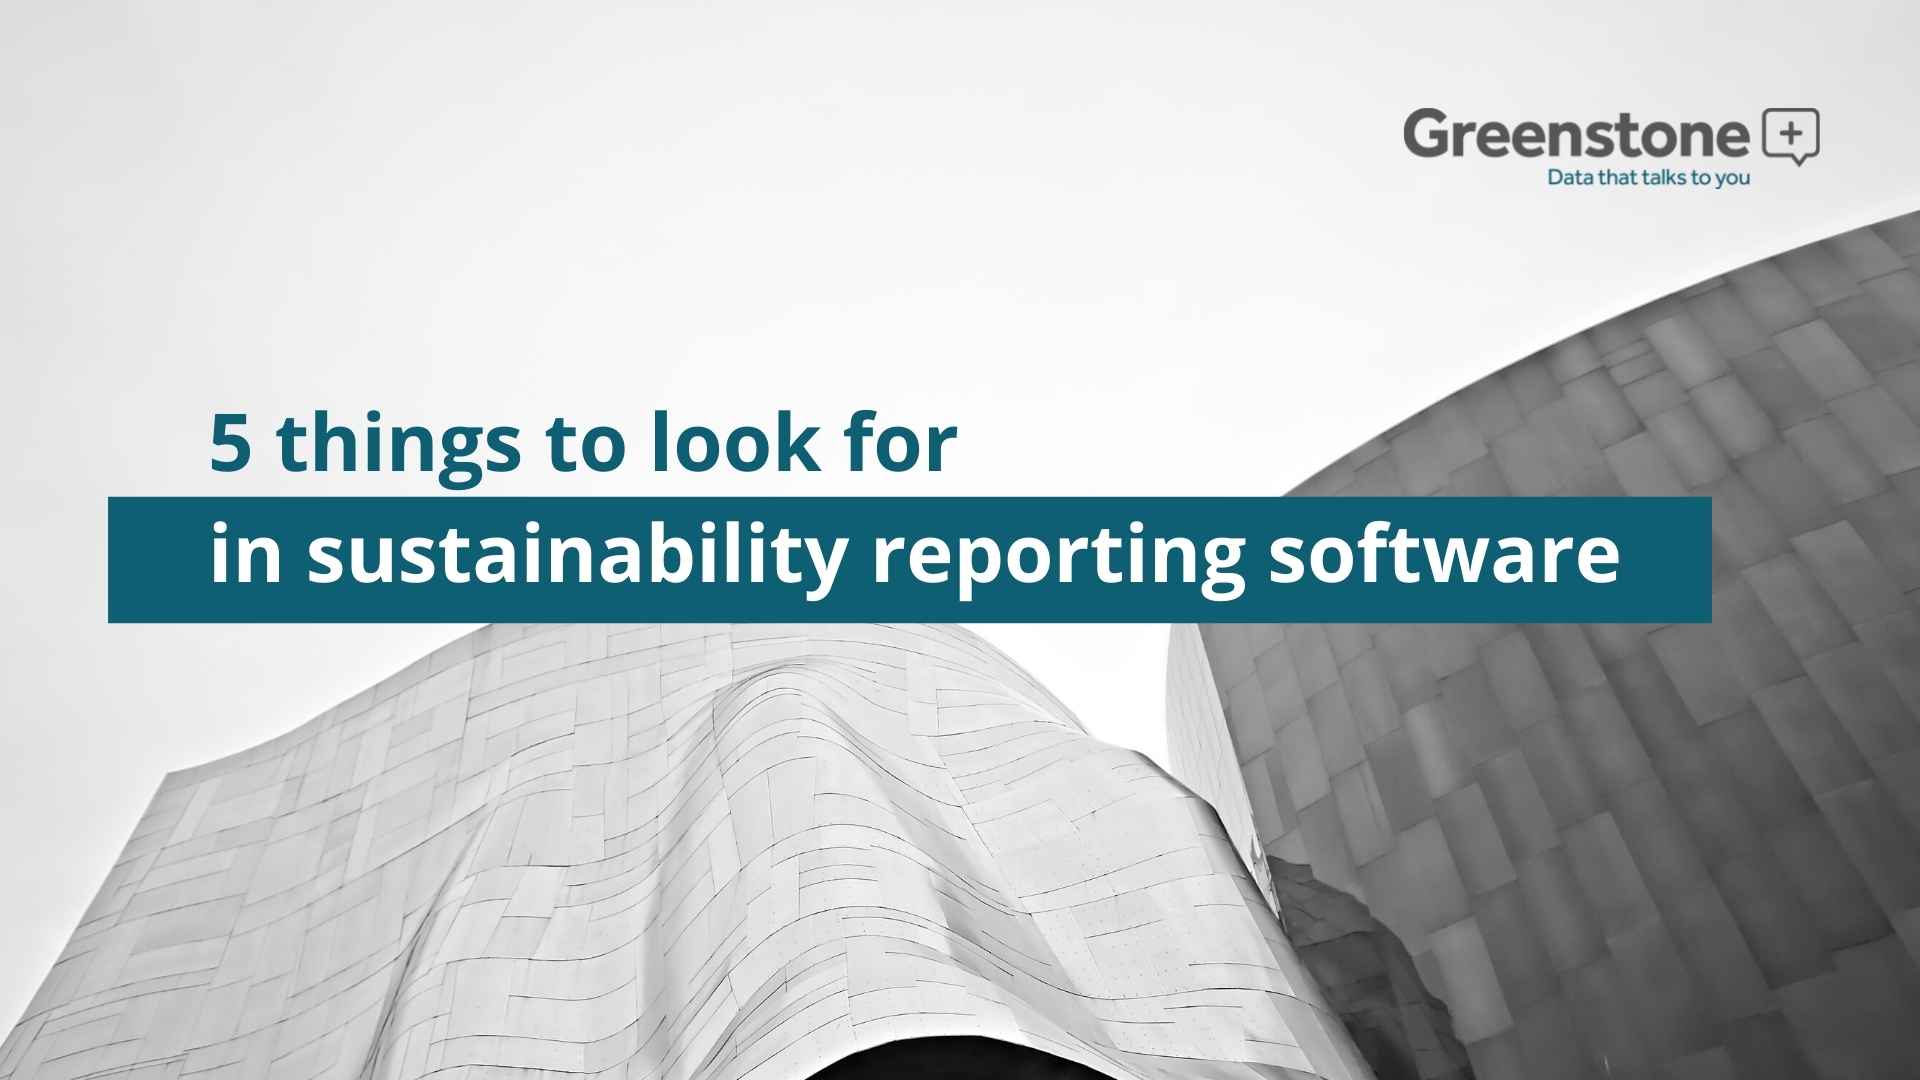 5 things to look for in sustainability reporting software